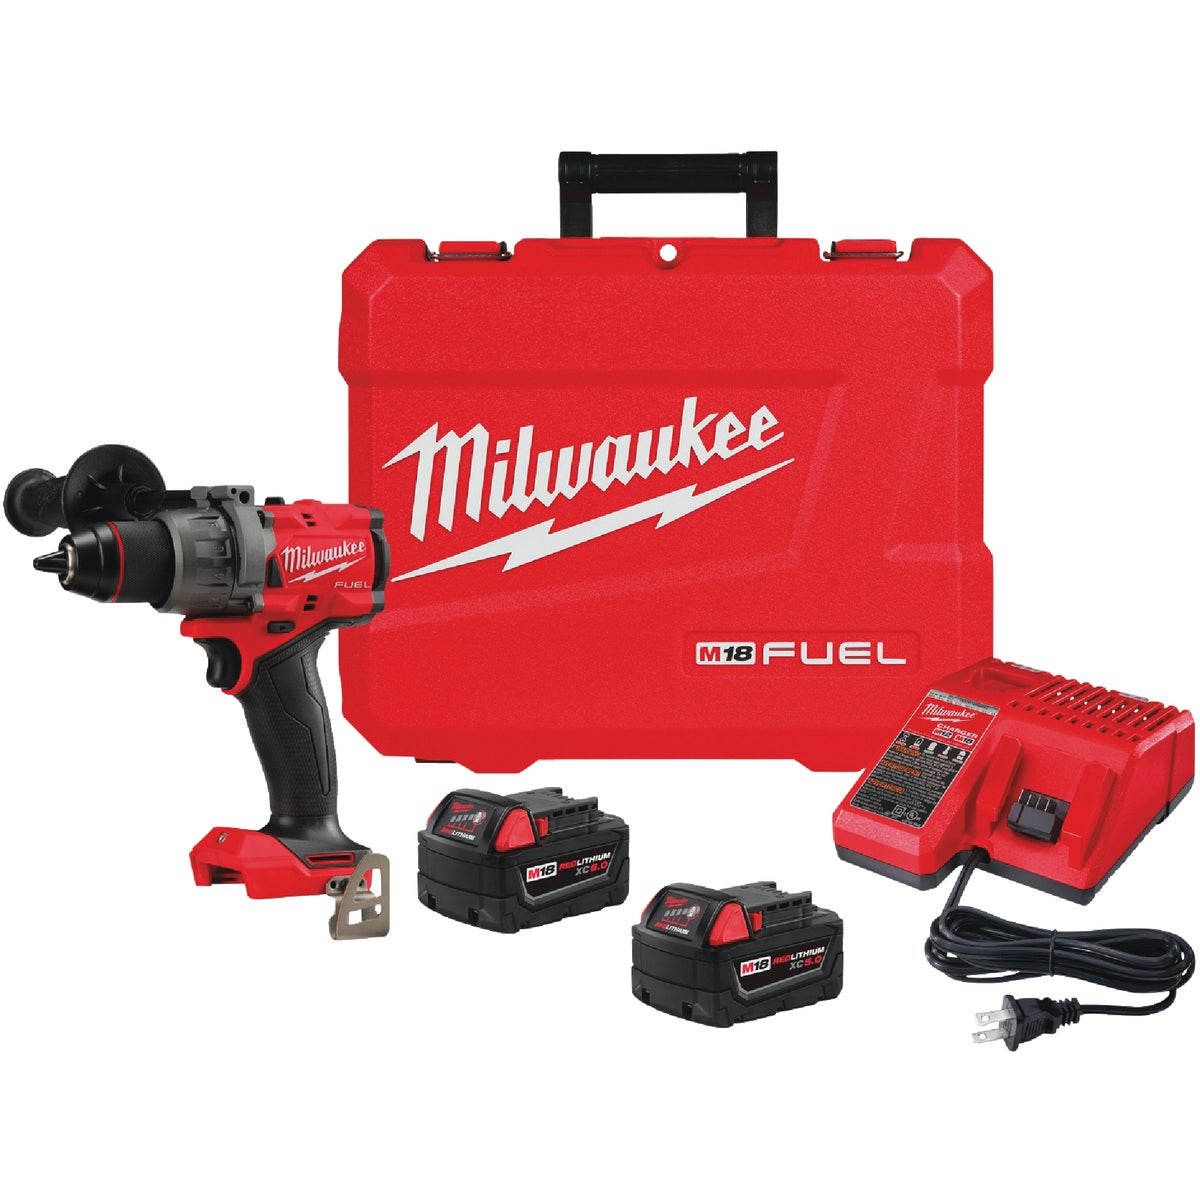 Milwaukee M18 FUEL 18-Volt Lithium-Ion Brushless 1/2 In. Cordless Hammer Drill Kit